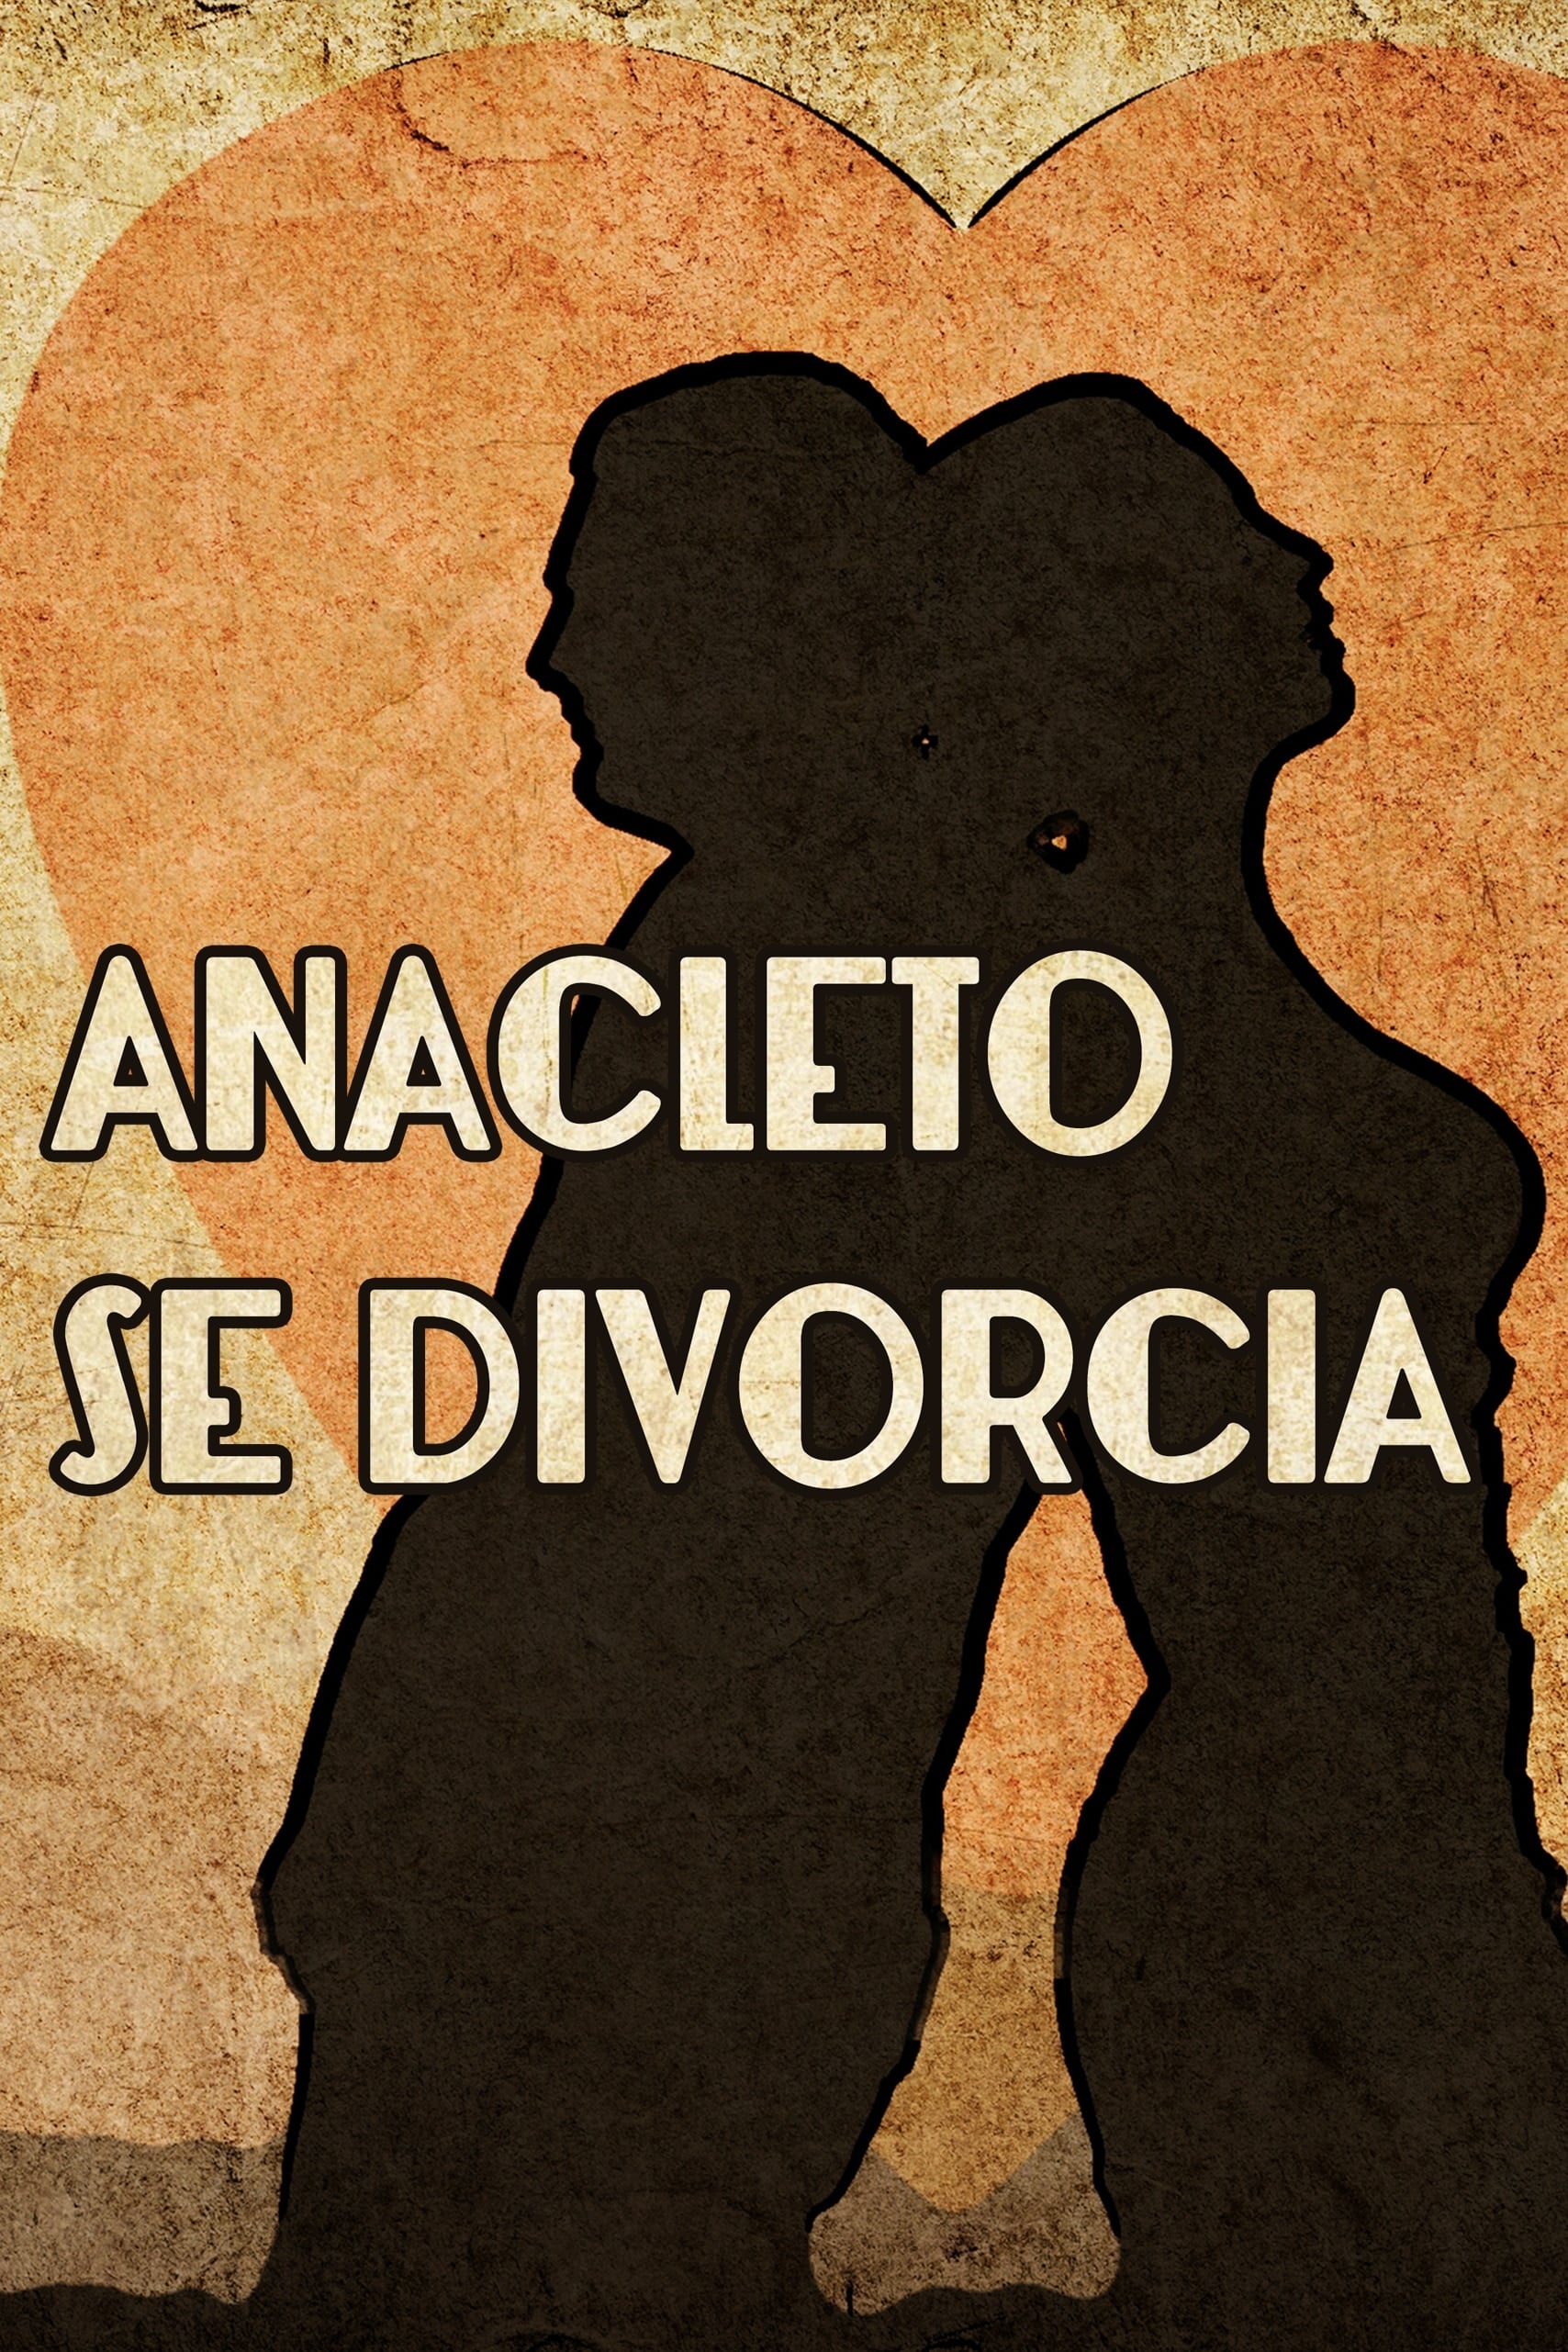 Anacleto Gets Divorced